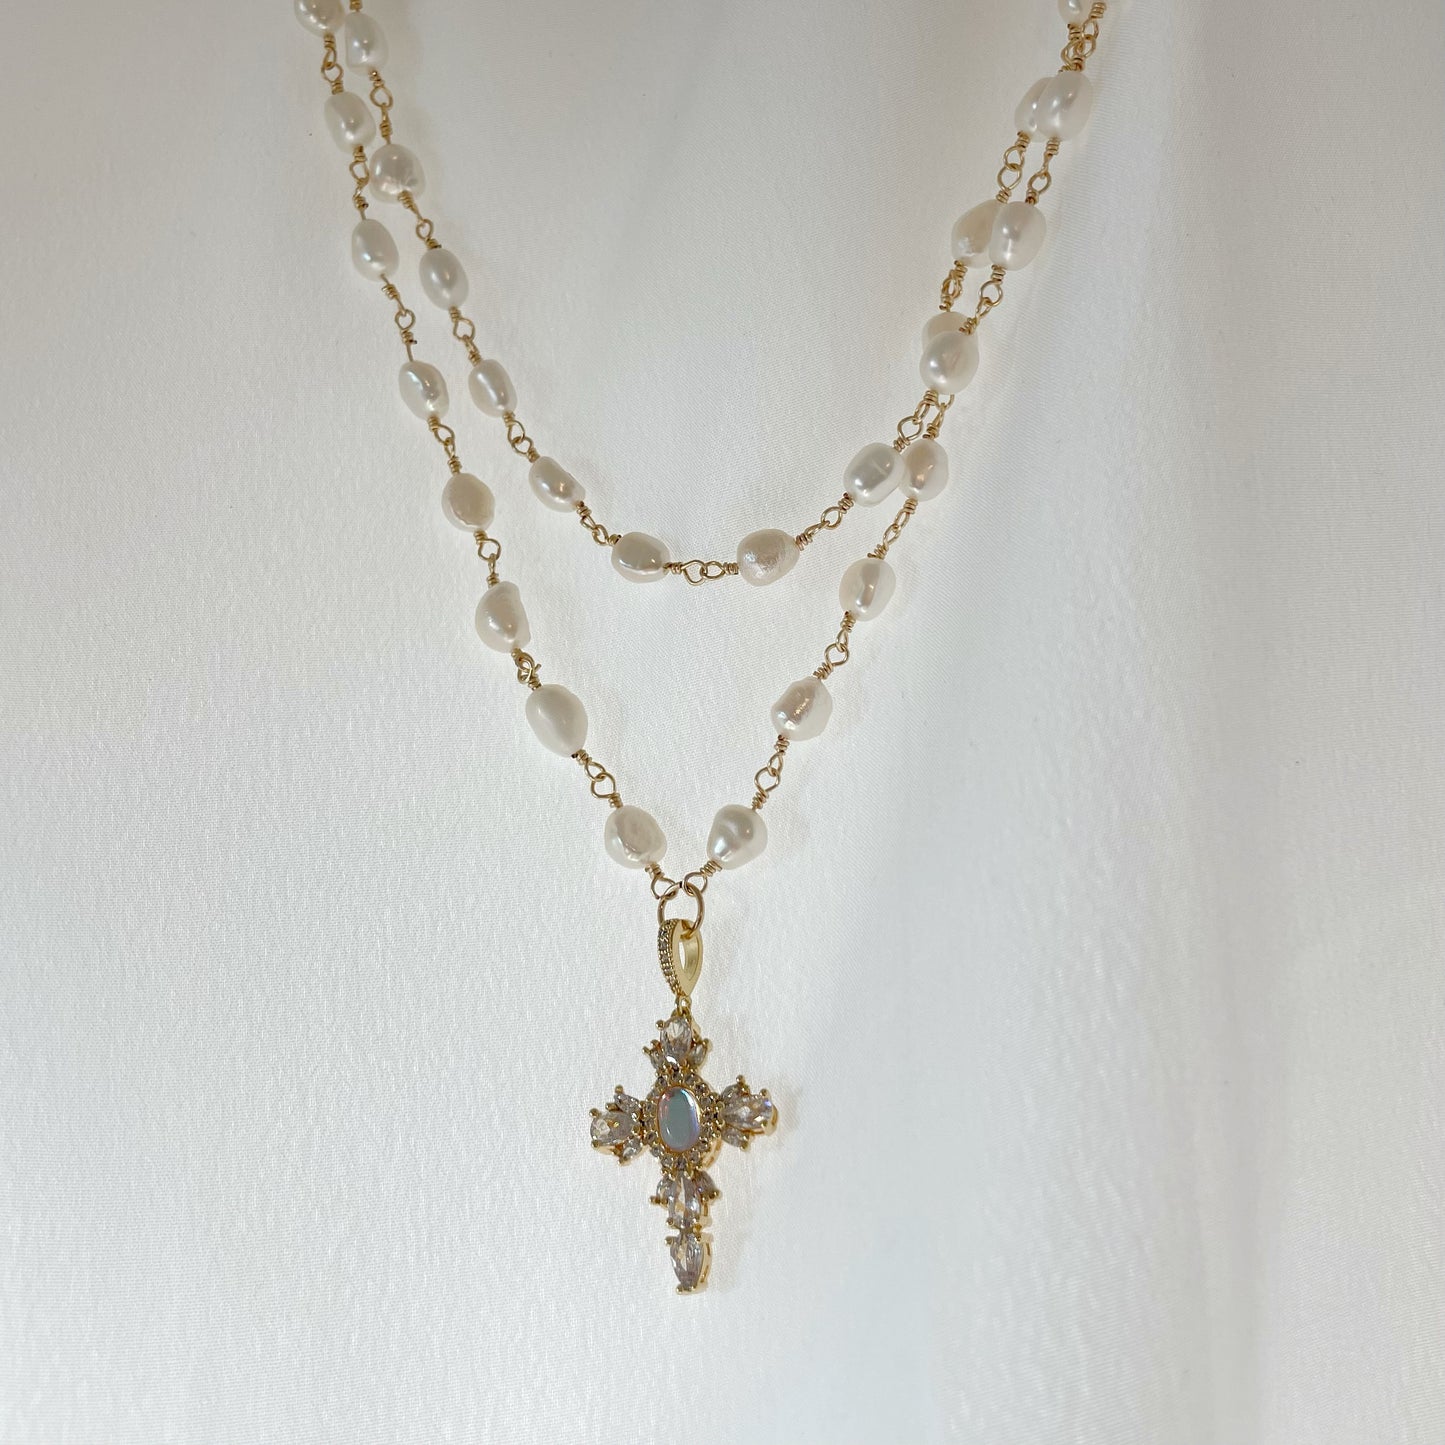 The Madonna Necklace